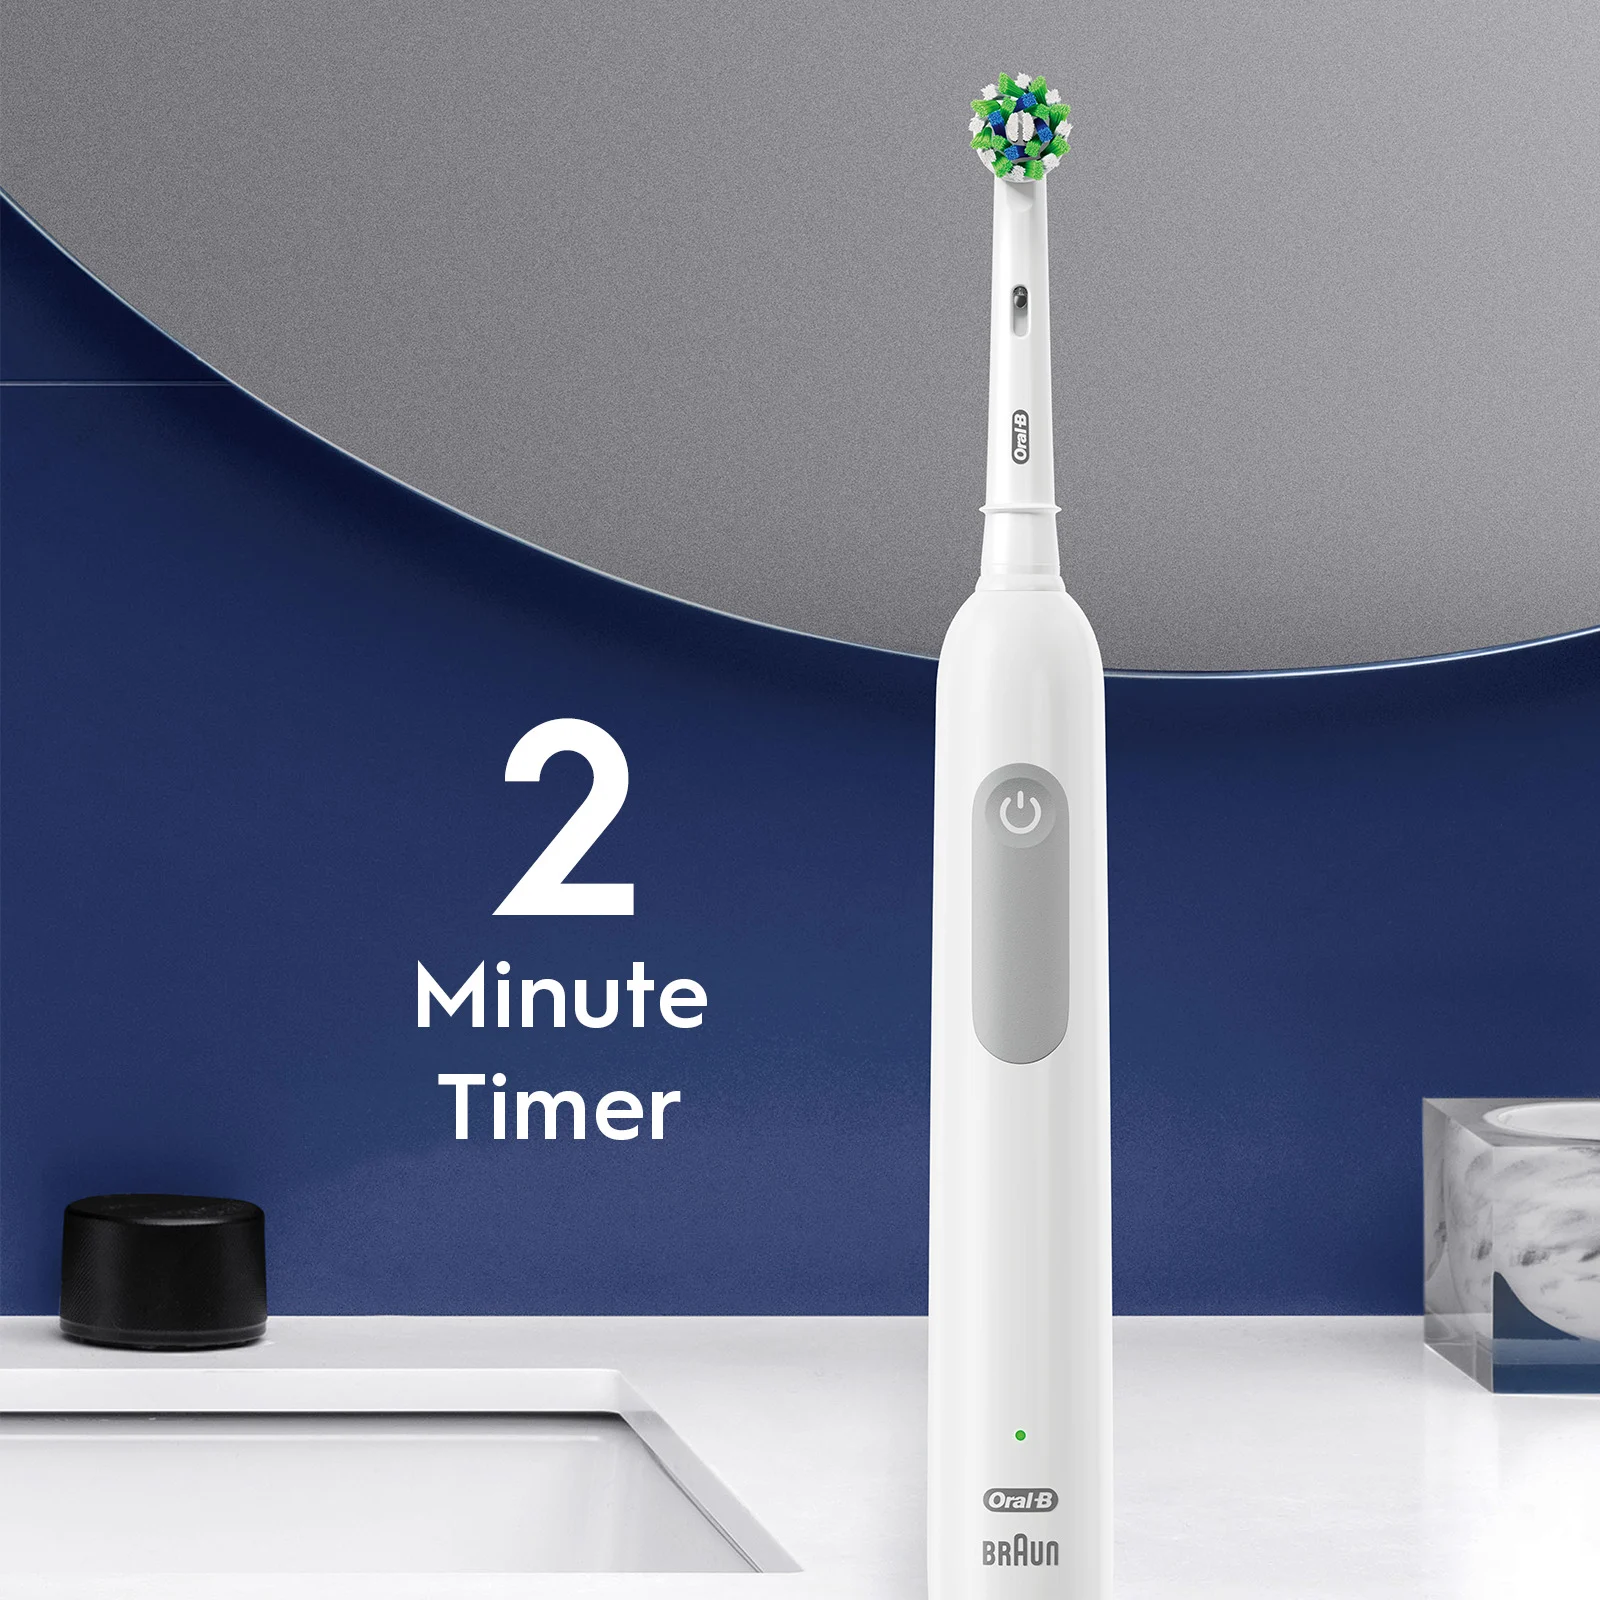 Oral-B Pro 1000 Electric Rechargeable Toothbrush